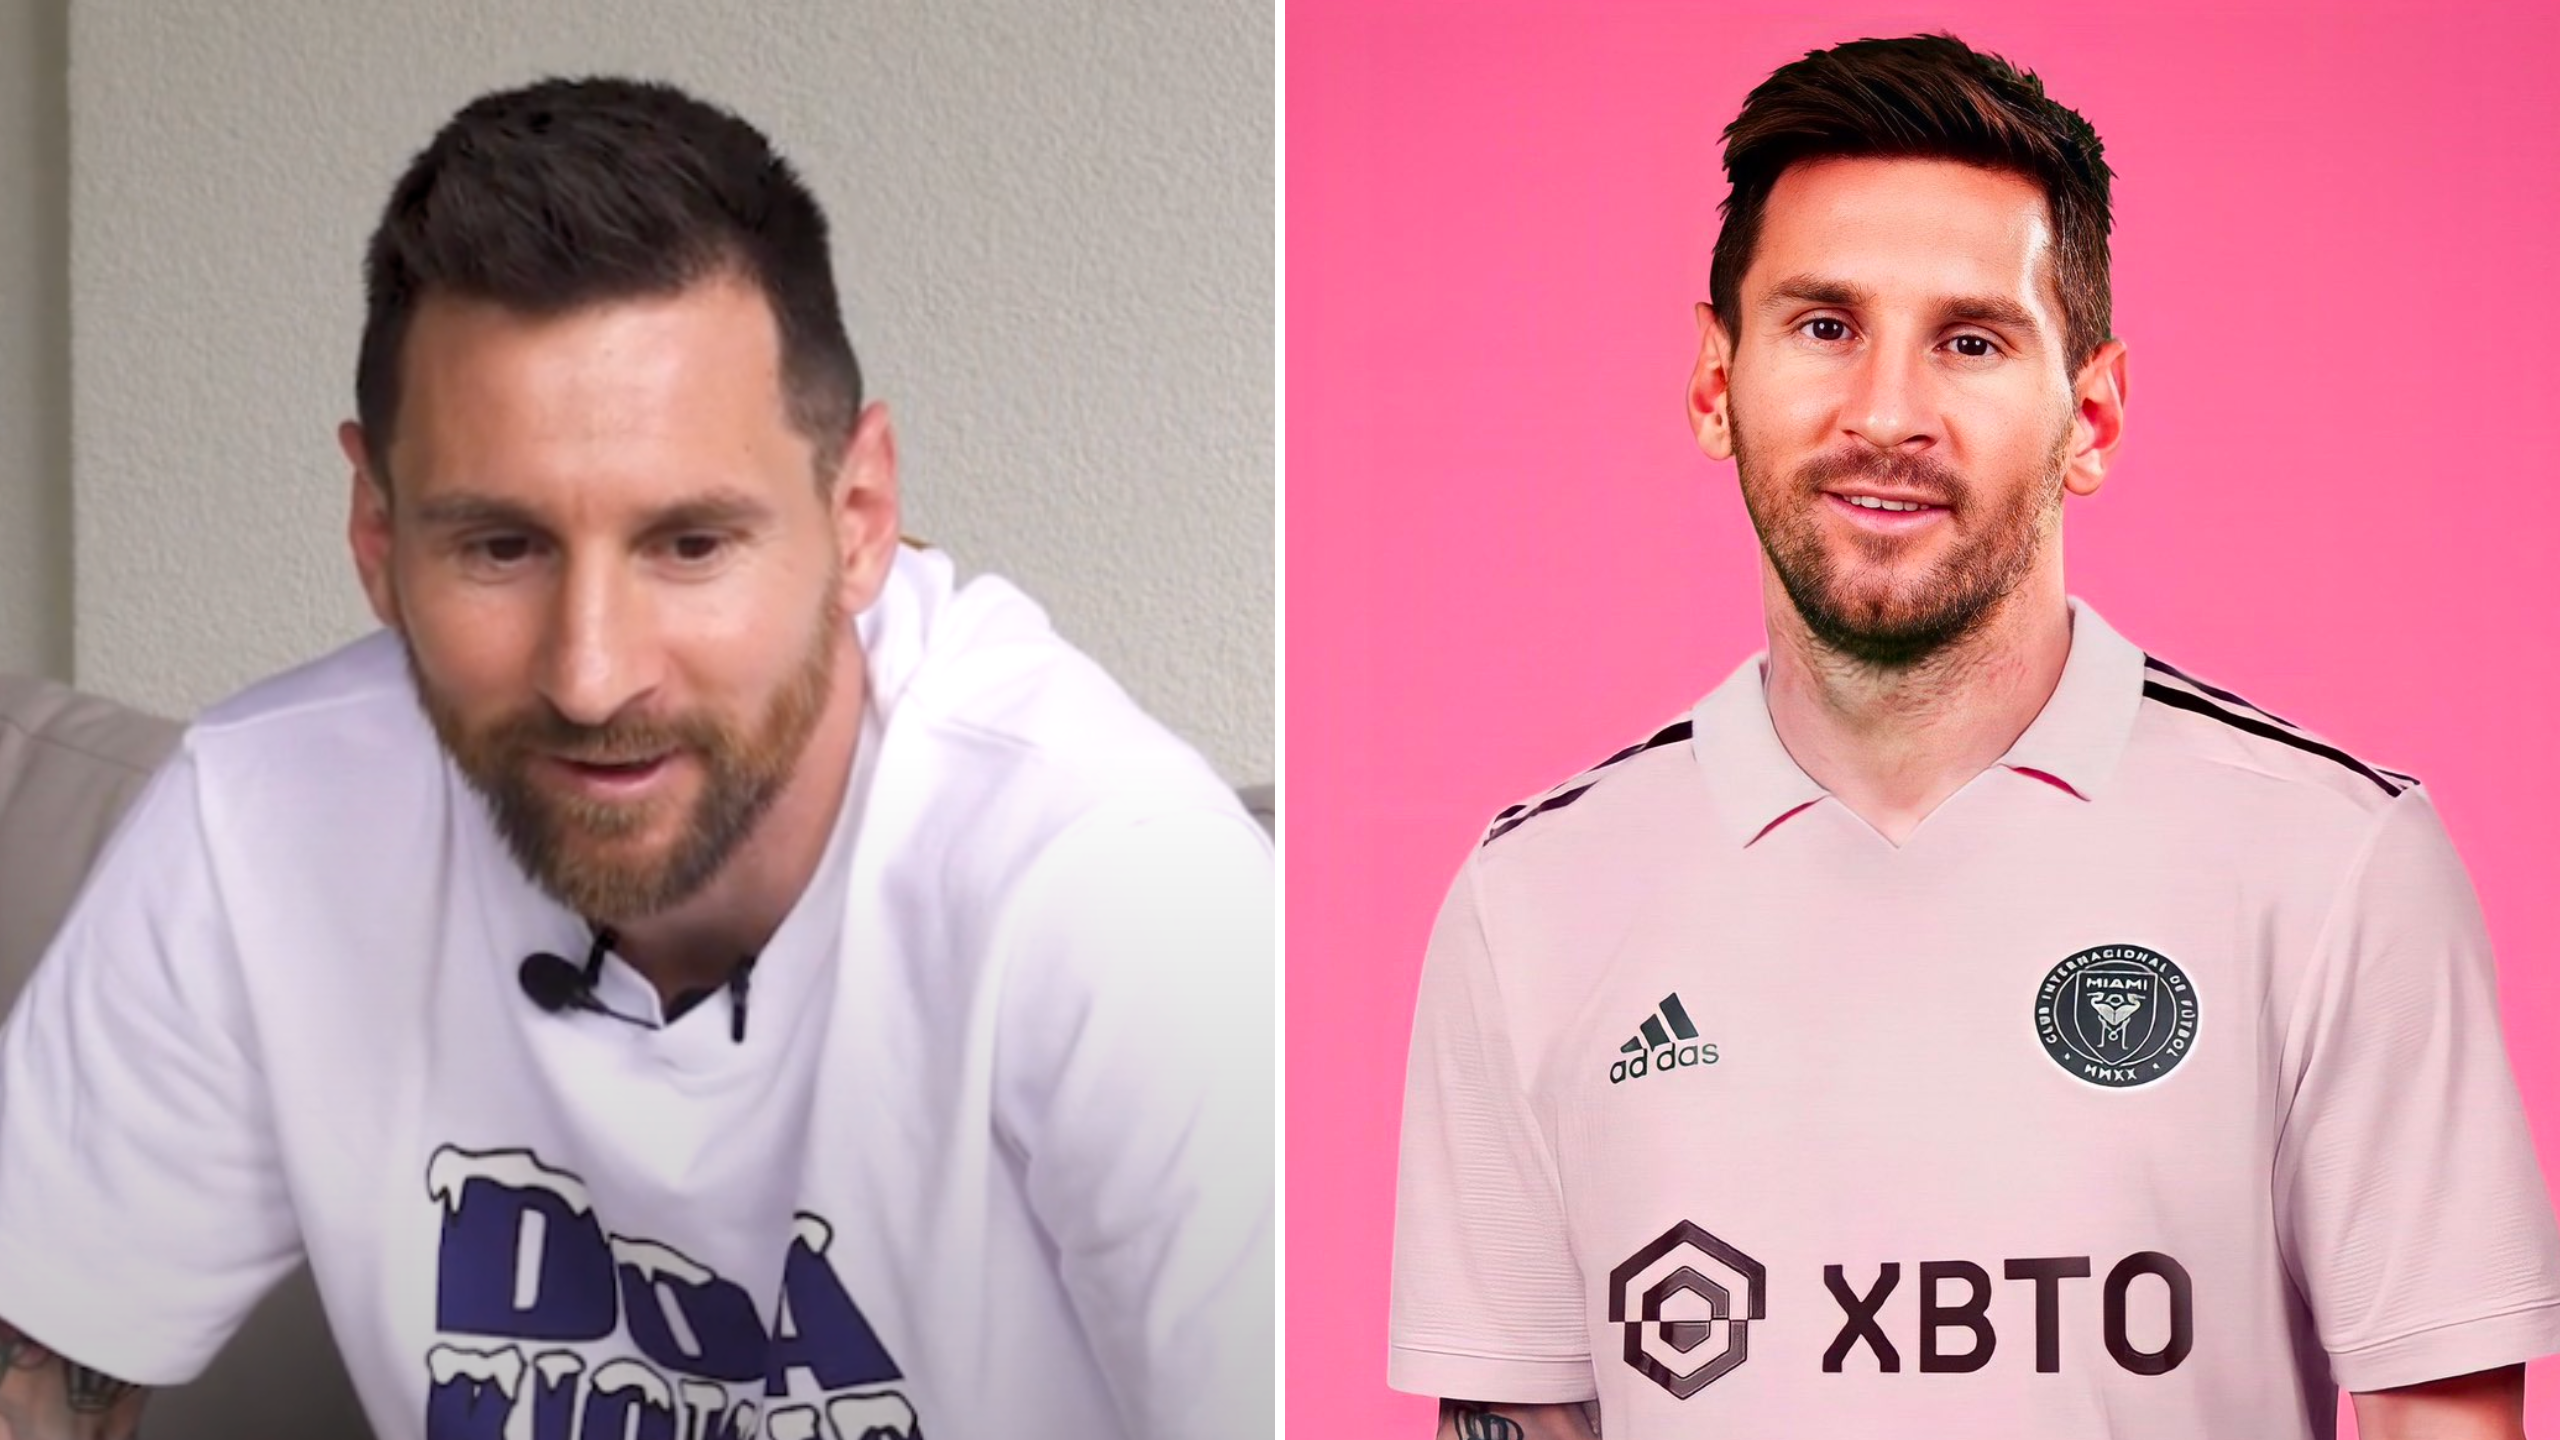 Lionel Messi Inter Miami transfer live updates: Follow the latest as World  Cup winner heads to MLS - The Athletic